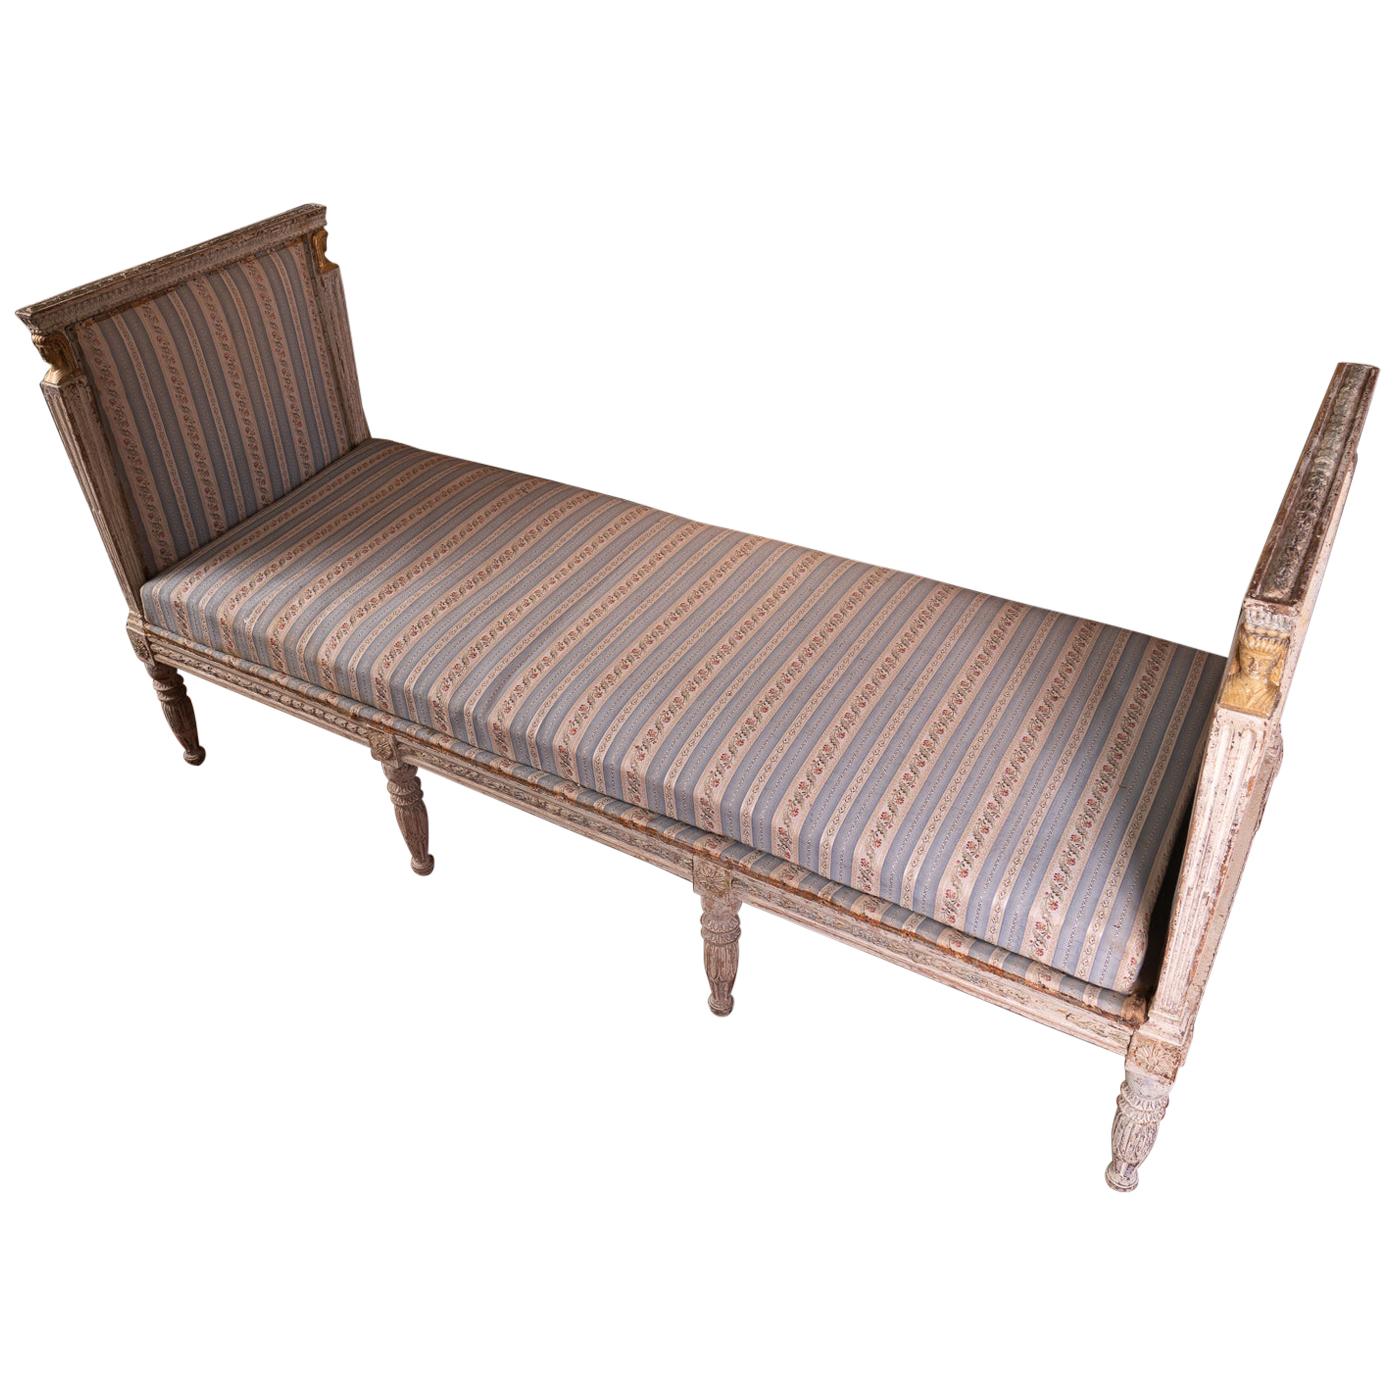 Exceptional 18th Century Swedish Daybed